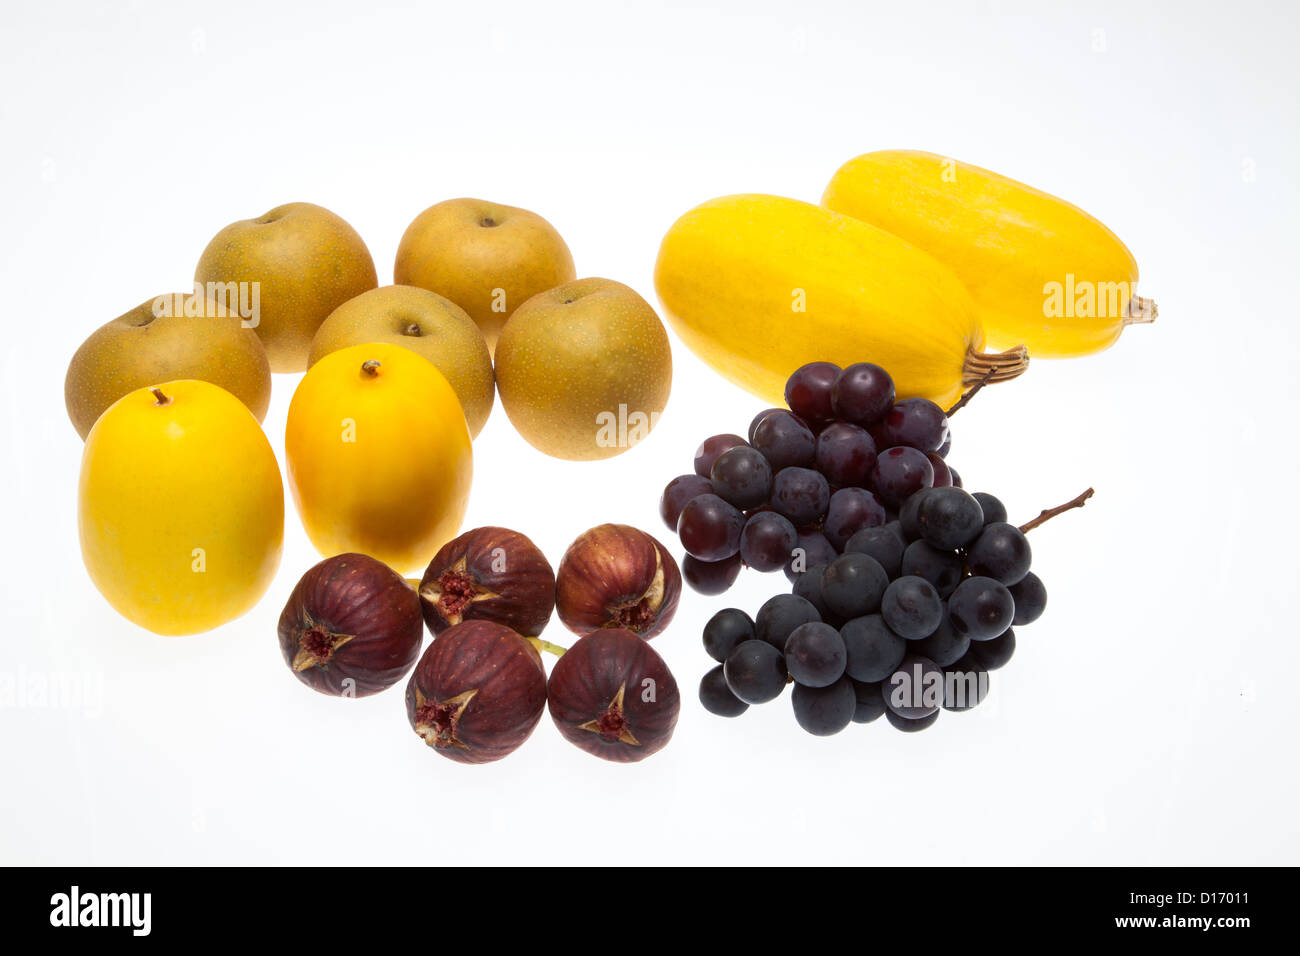 Various types of fruits against white background Stock Photo